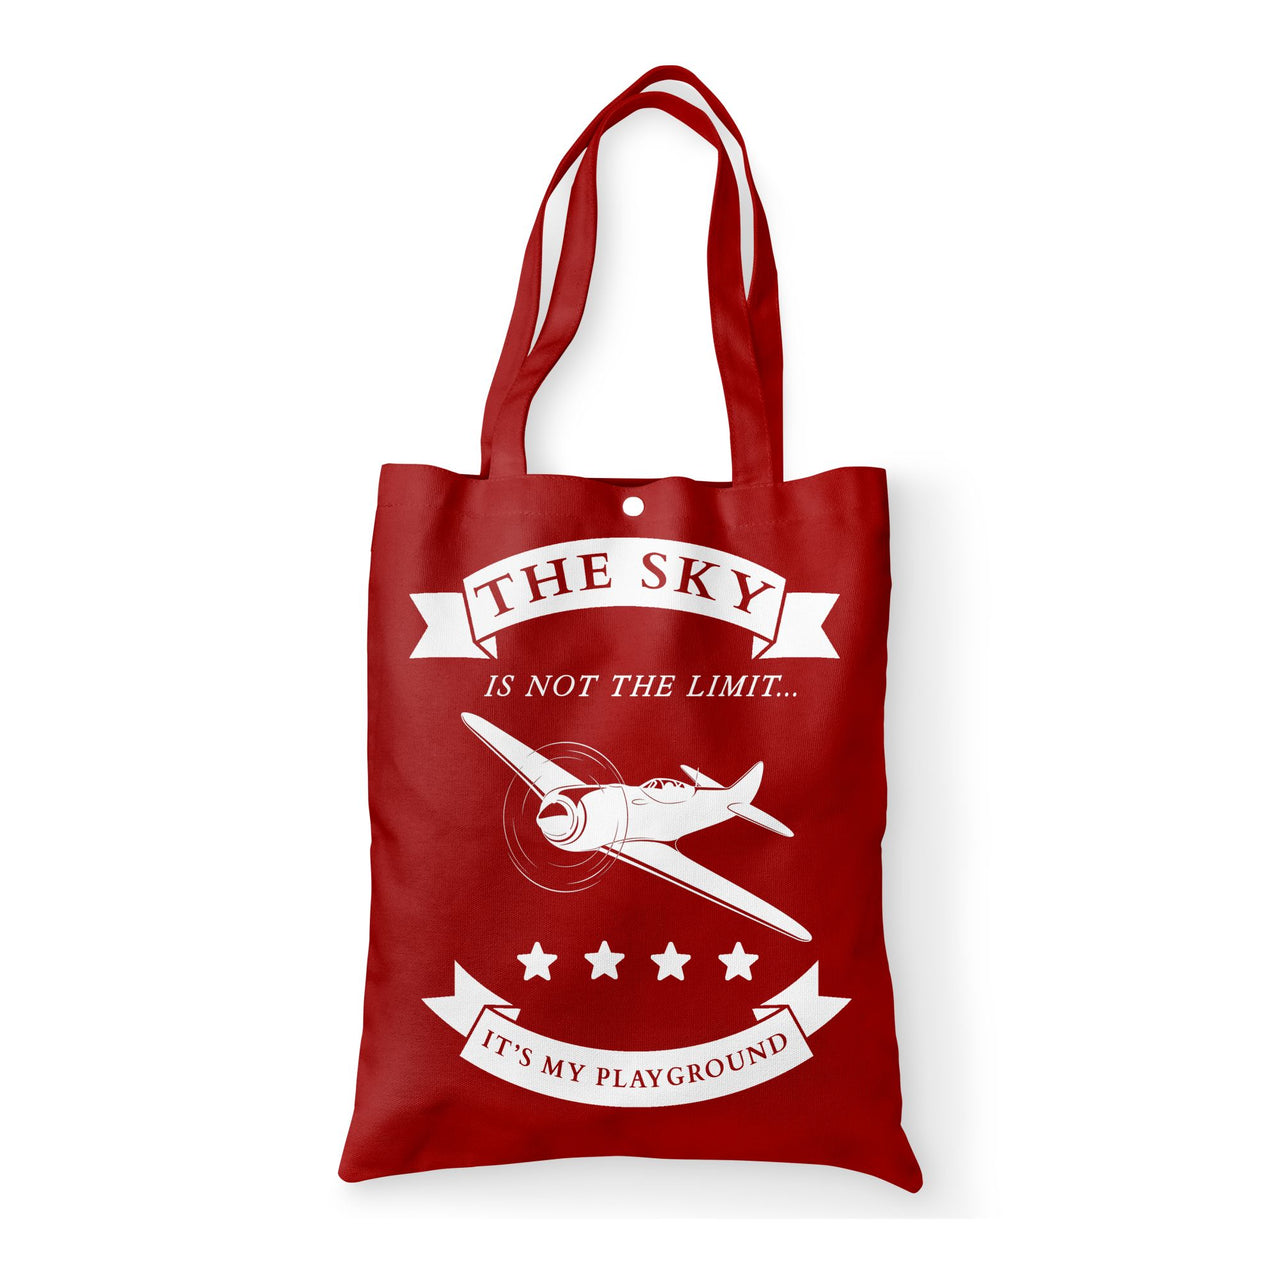 The Sky is not the limit, It's my playground Designed Tote Bags